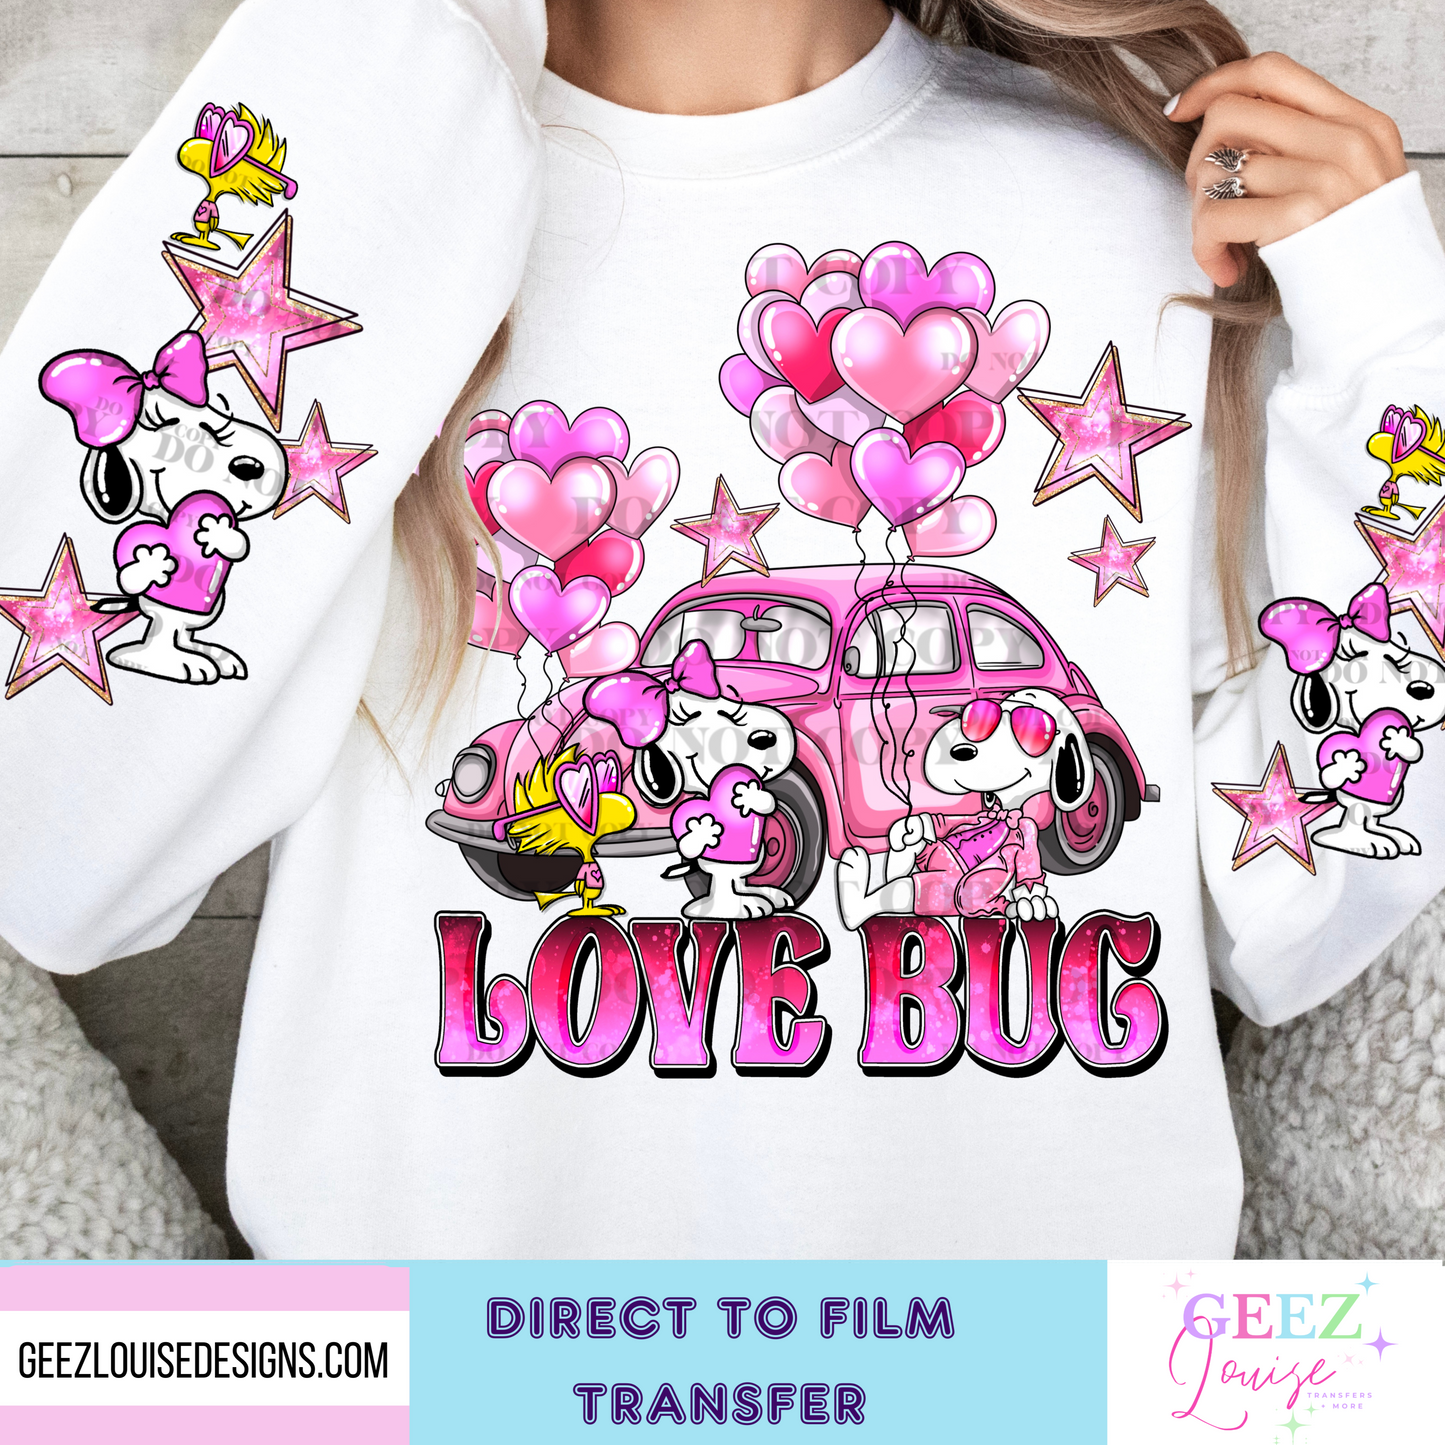 Love bug - Direct to Film Transfer - made to order